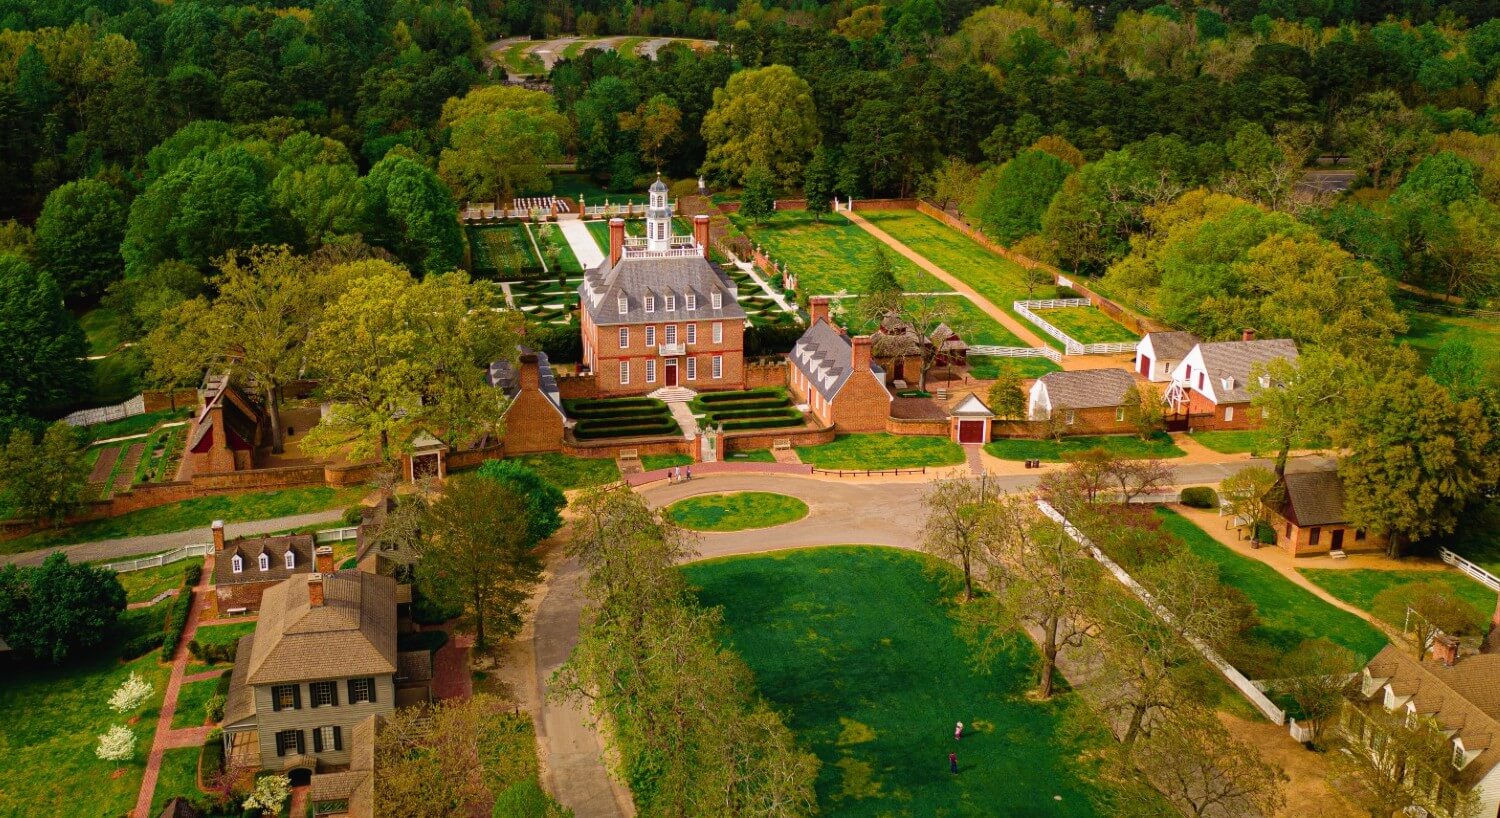 Aerial view of a colonial estate with decorative gardens and walkways, all surrounded by tall green trees